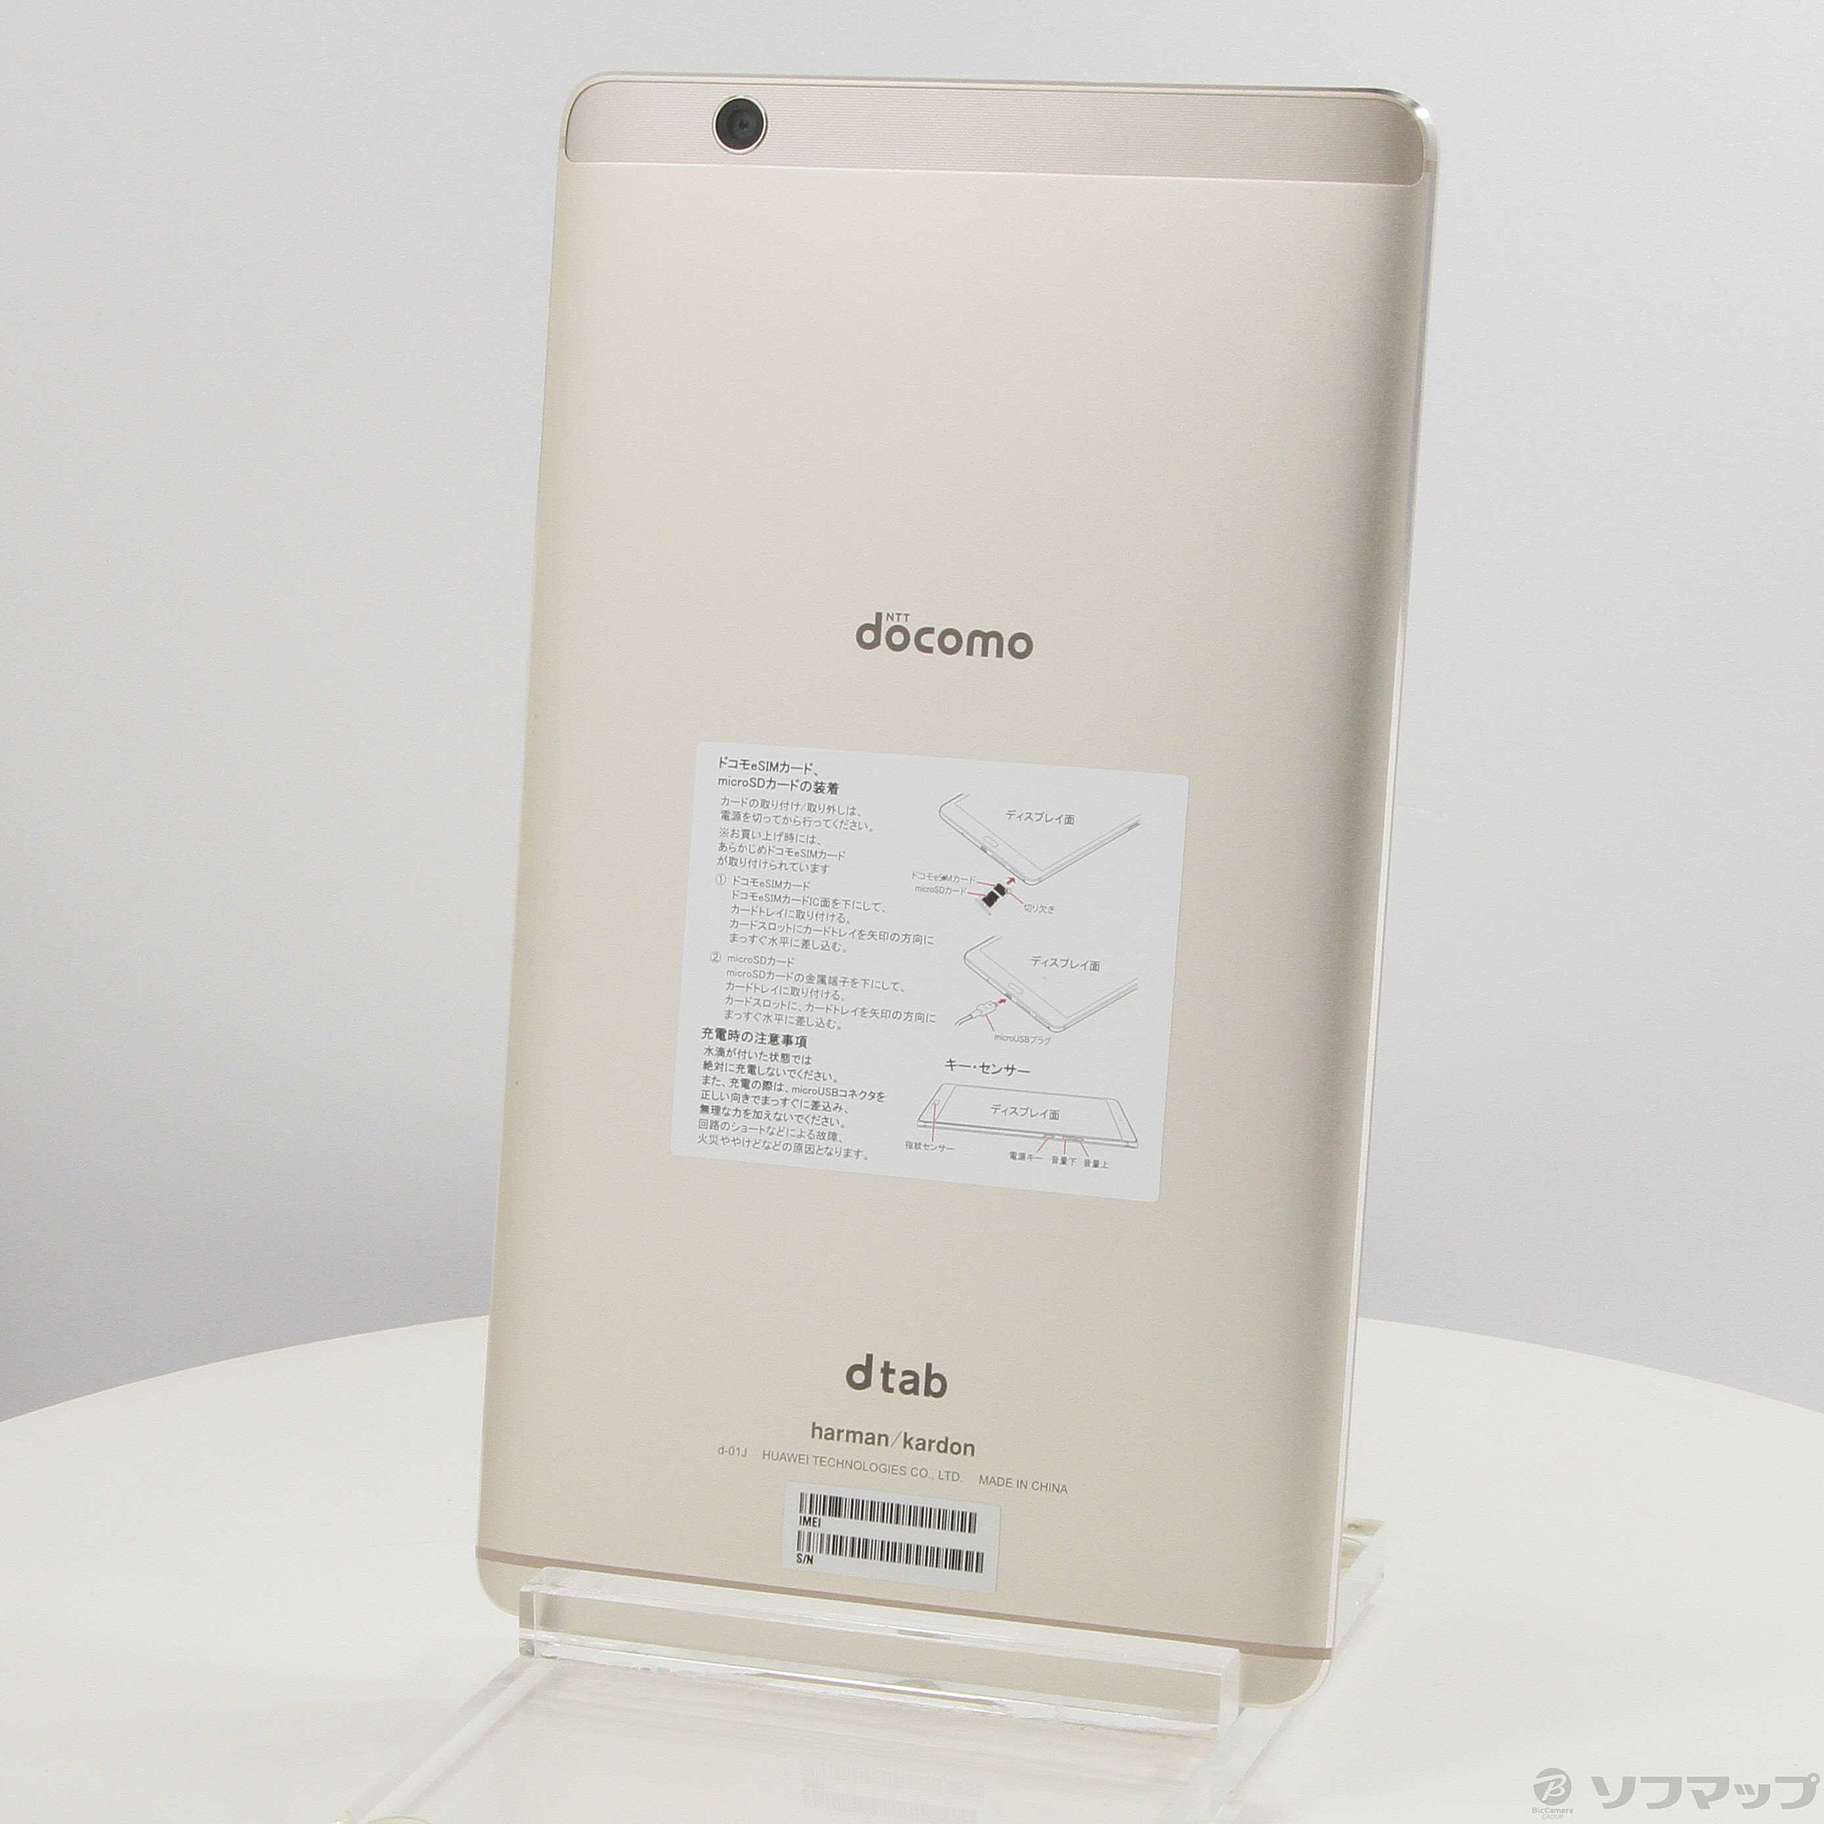 Huawei dtab Compact d-01J Gold - タブレット